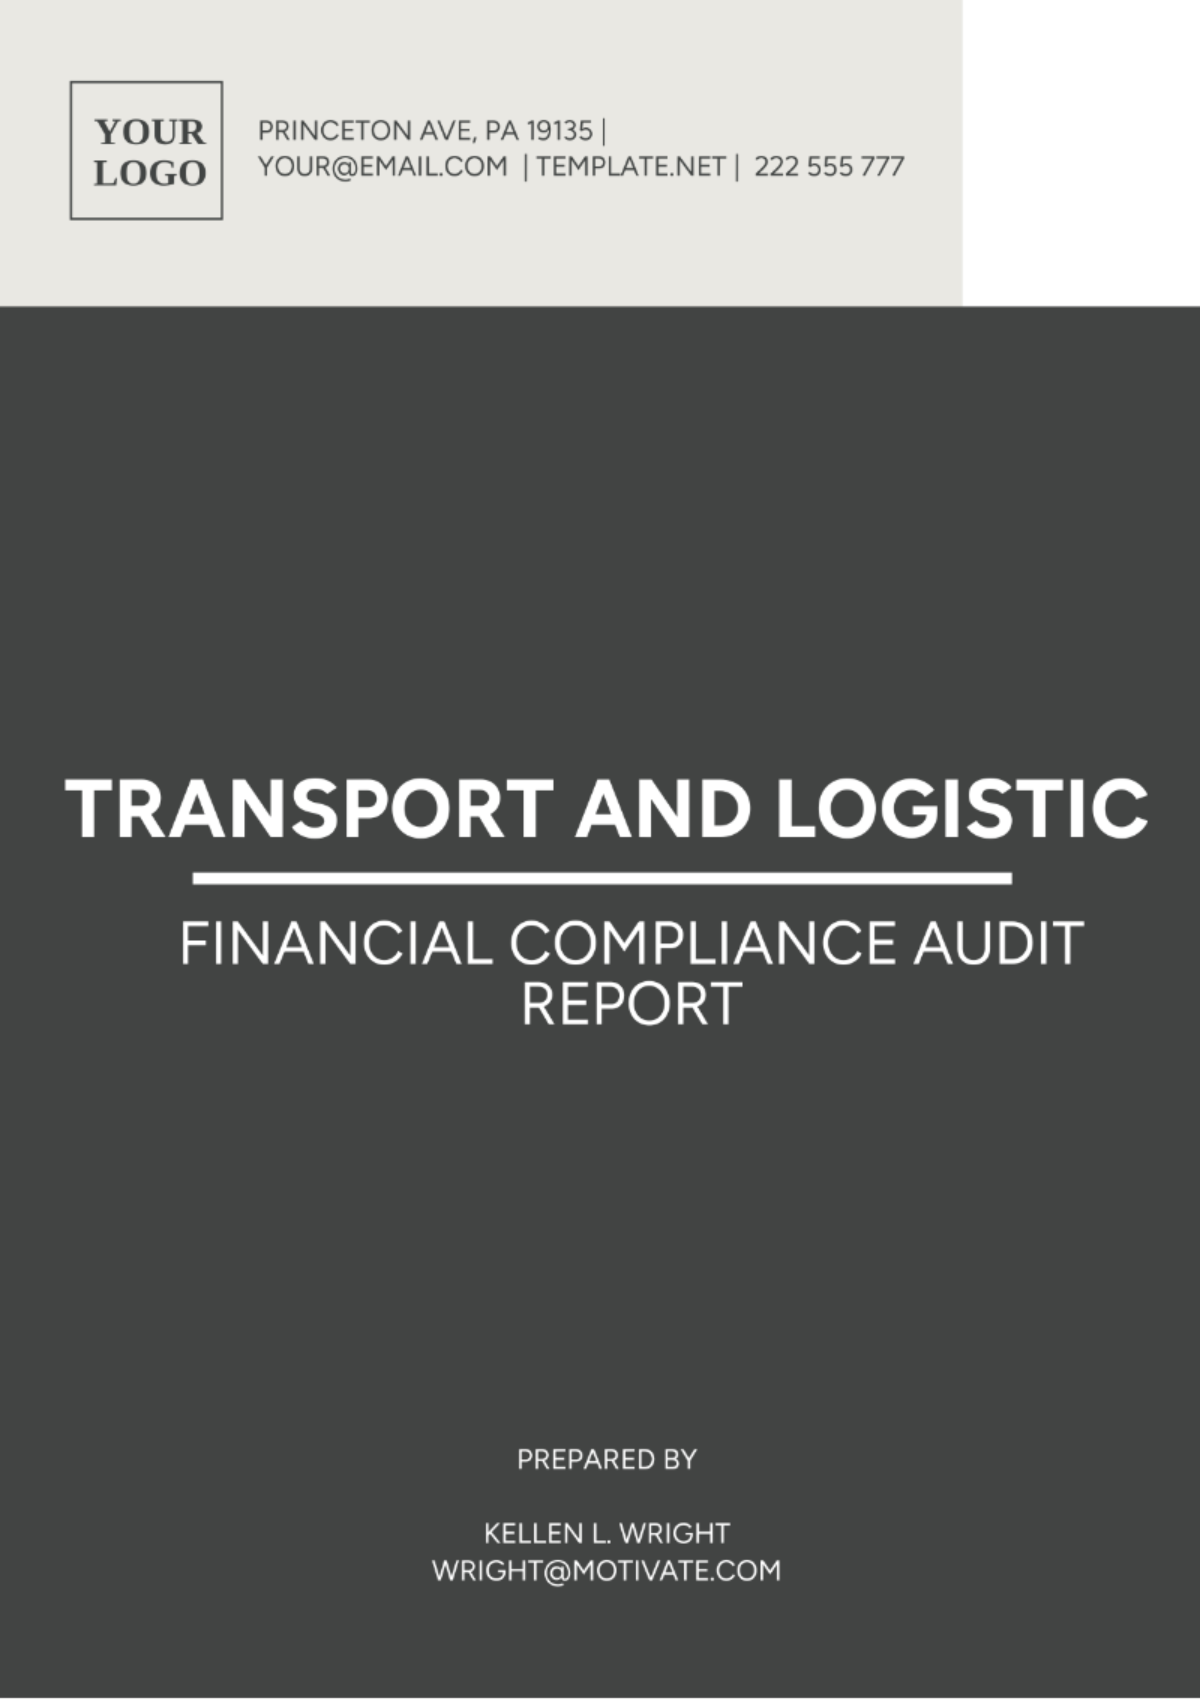 Transport And Logistics Financial Compliance Audit Report Template